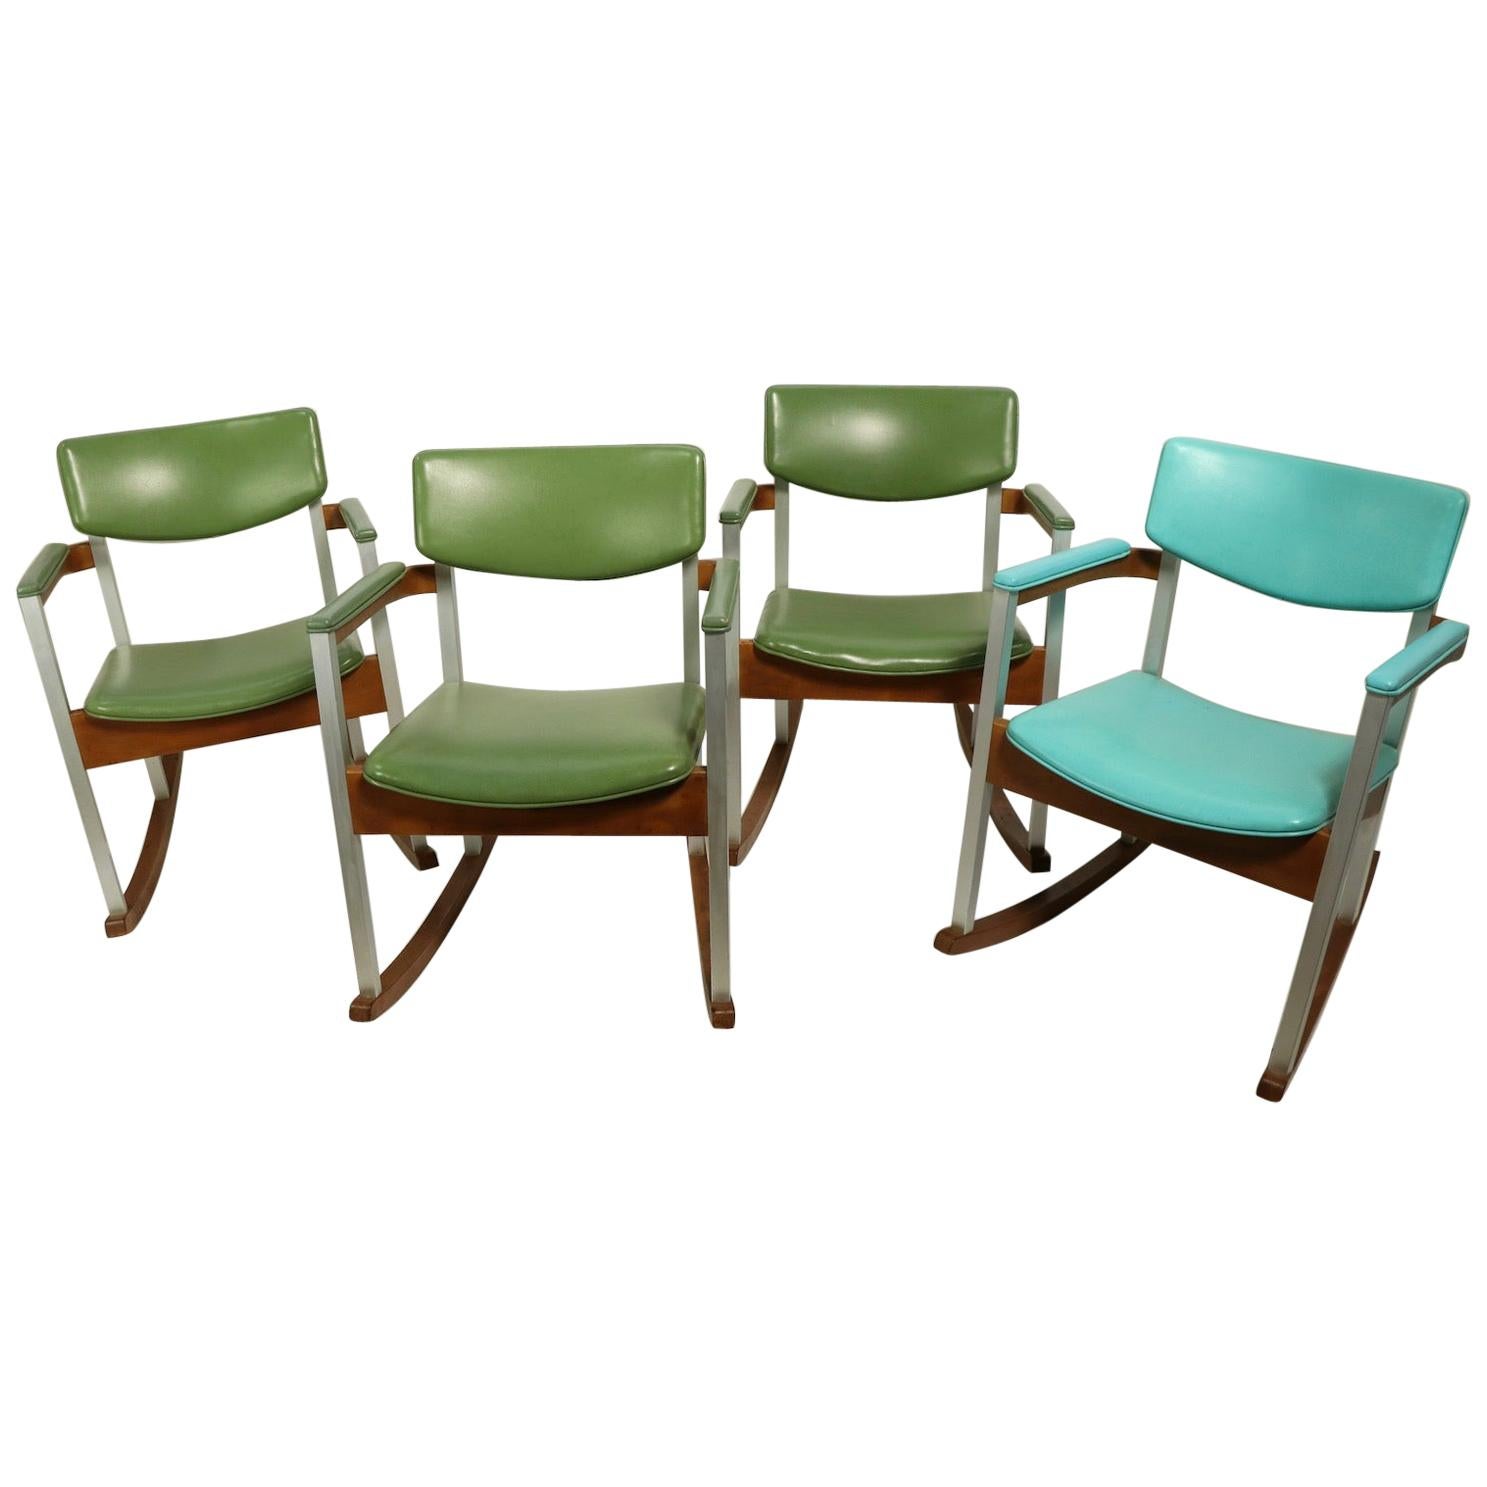 4 Mid Century Rocking Chairs by Thonet